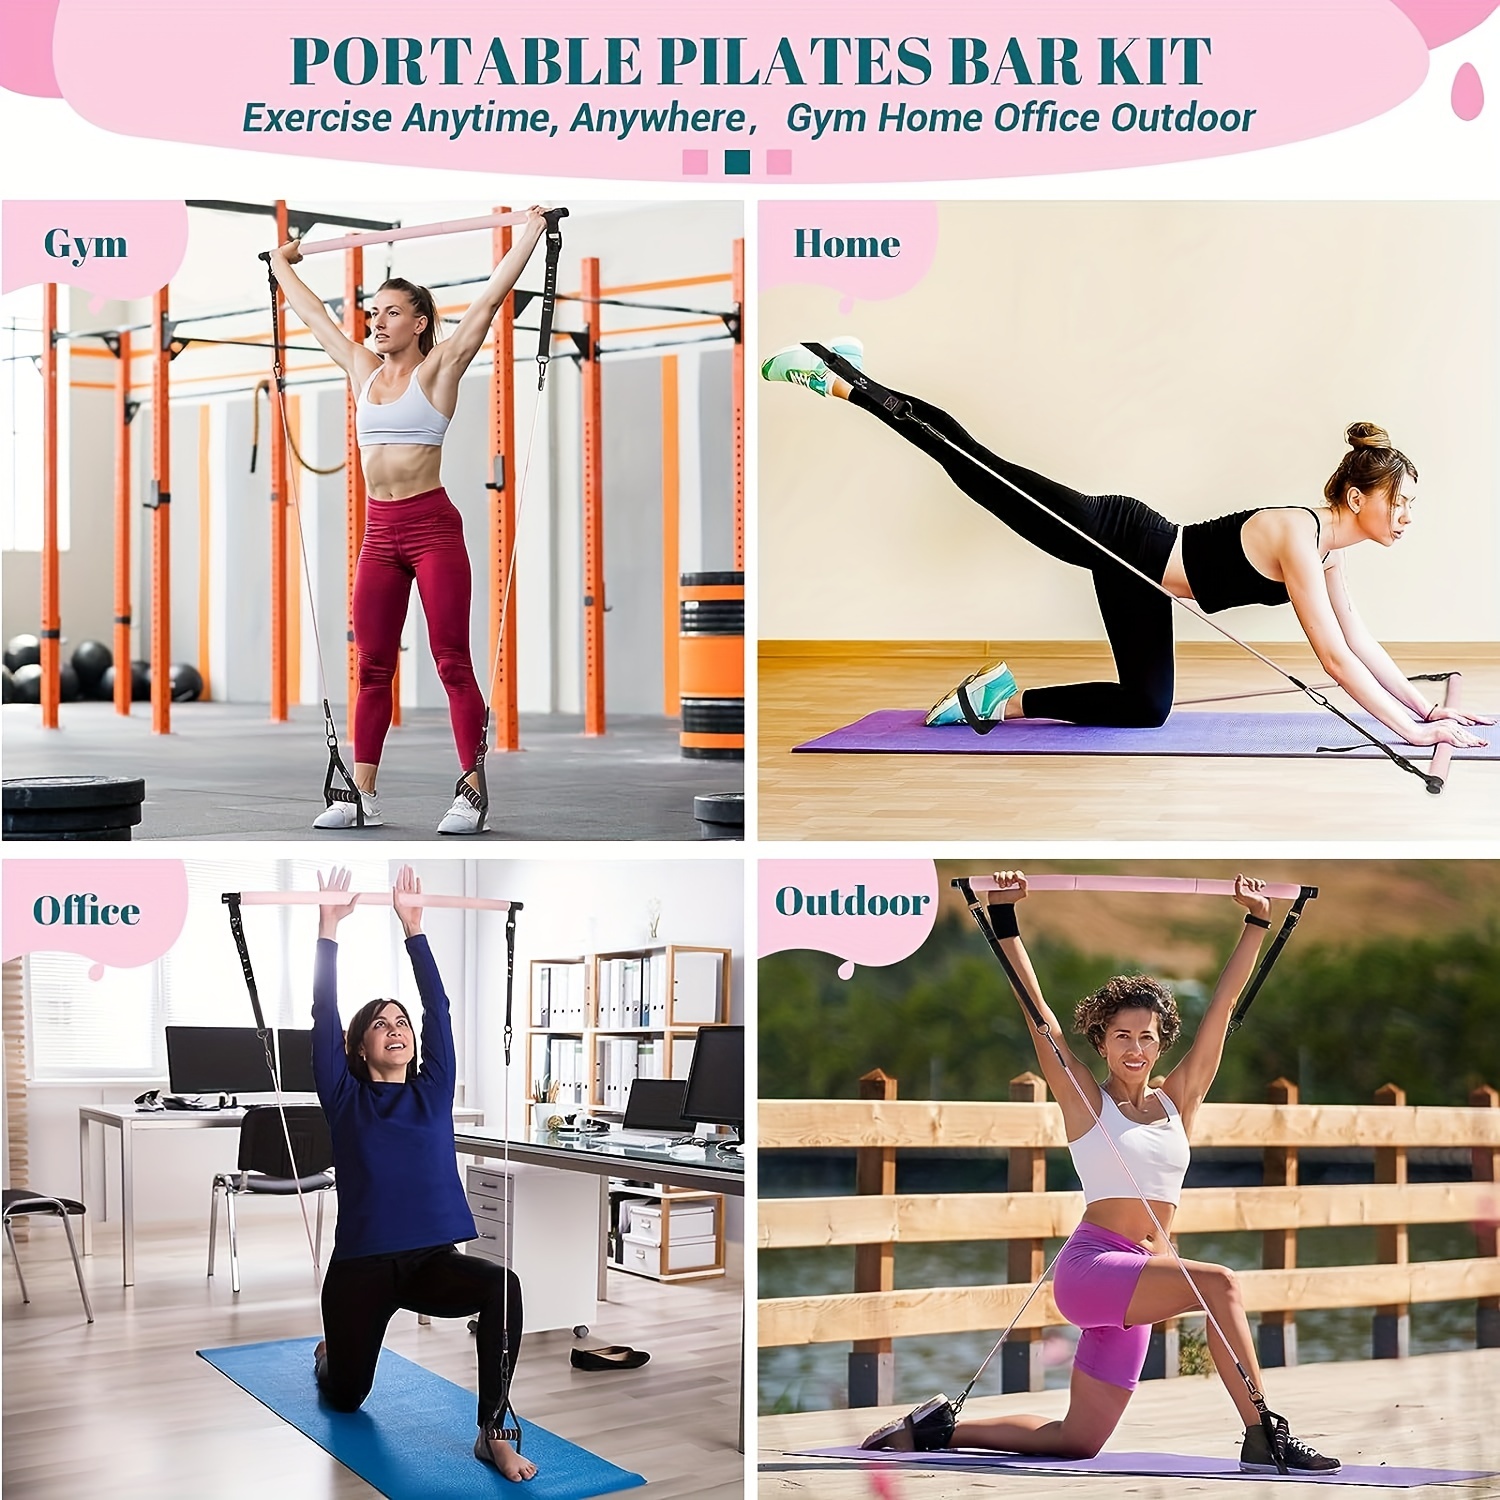  Portable Pilates Bar Kit with Resistance Bands